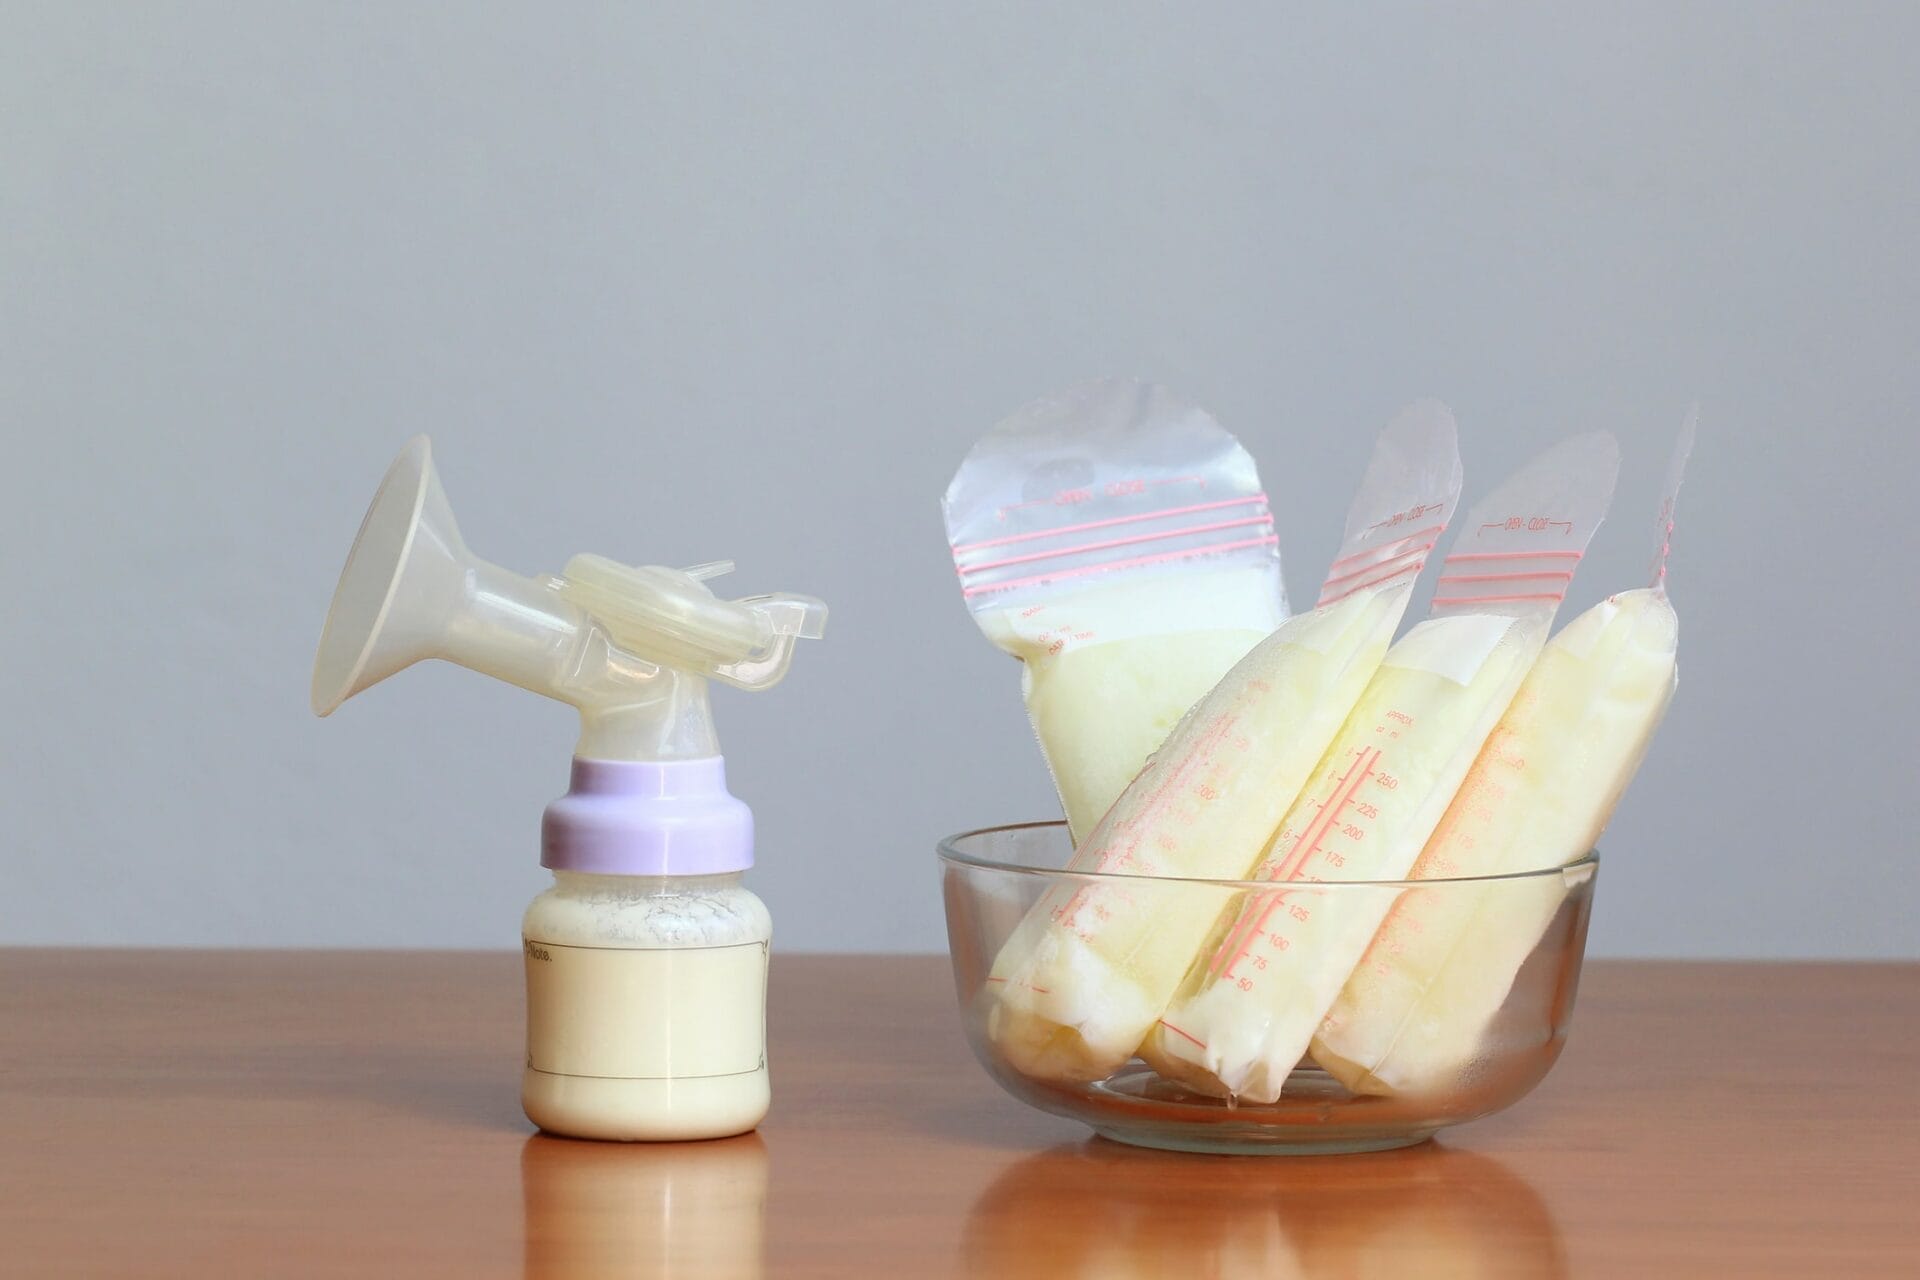 12 breastfeeding and pumping essentials - must have items (+ tips